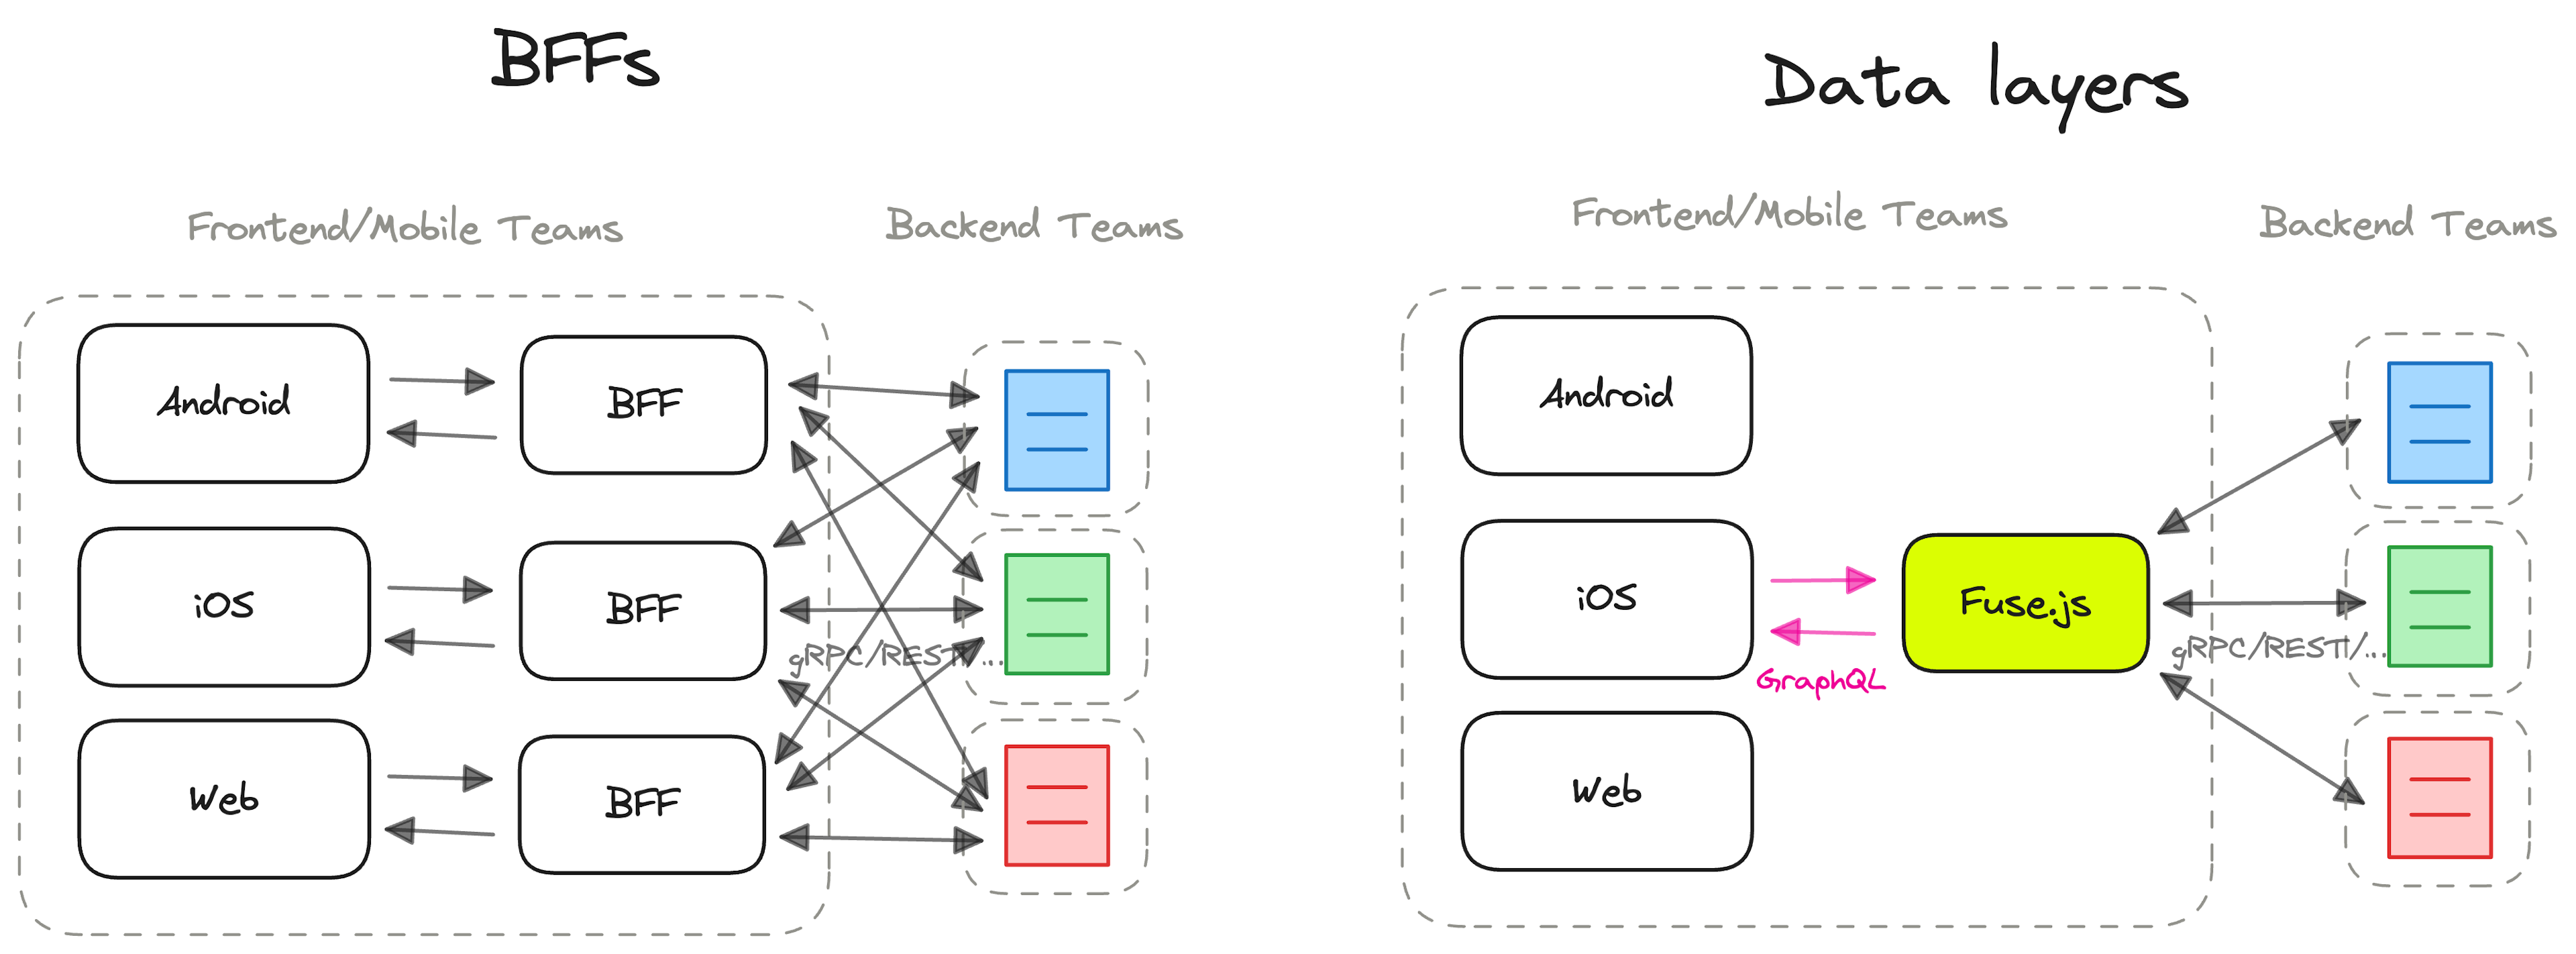 This shows on the left the classic workflow where we have boxes representing 'mobile', 'iOS' and 'web' development teams. These boxes all individually connect to their own BFF box which in turn connect to all the datasources of the backend teams. On the right we have the 'fuse.js' diagram where all the frontend teams connect to a node called 'fuse.js' which in turn connects all backend datasources.